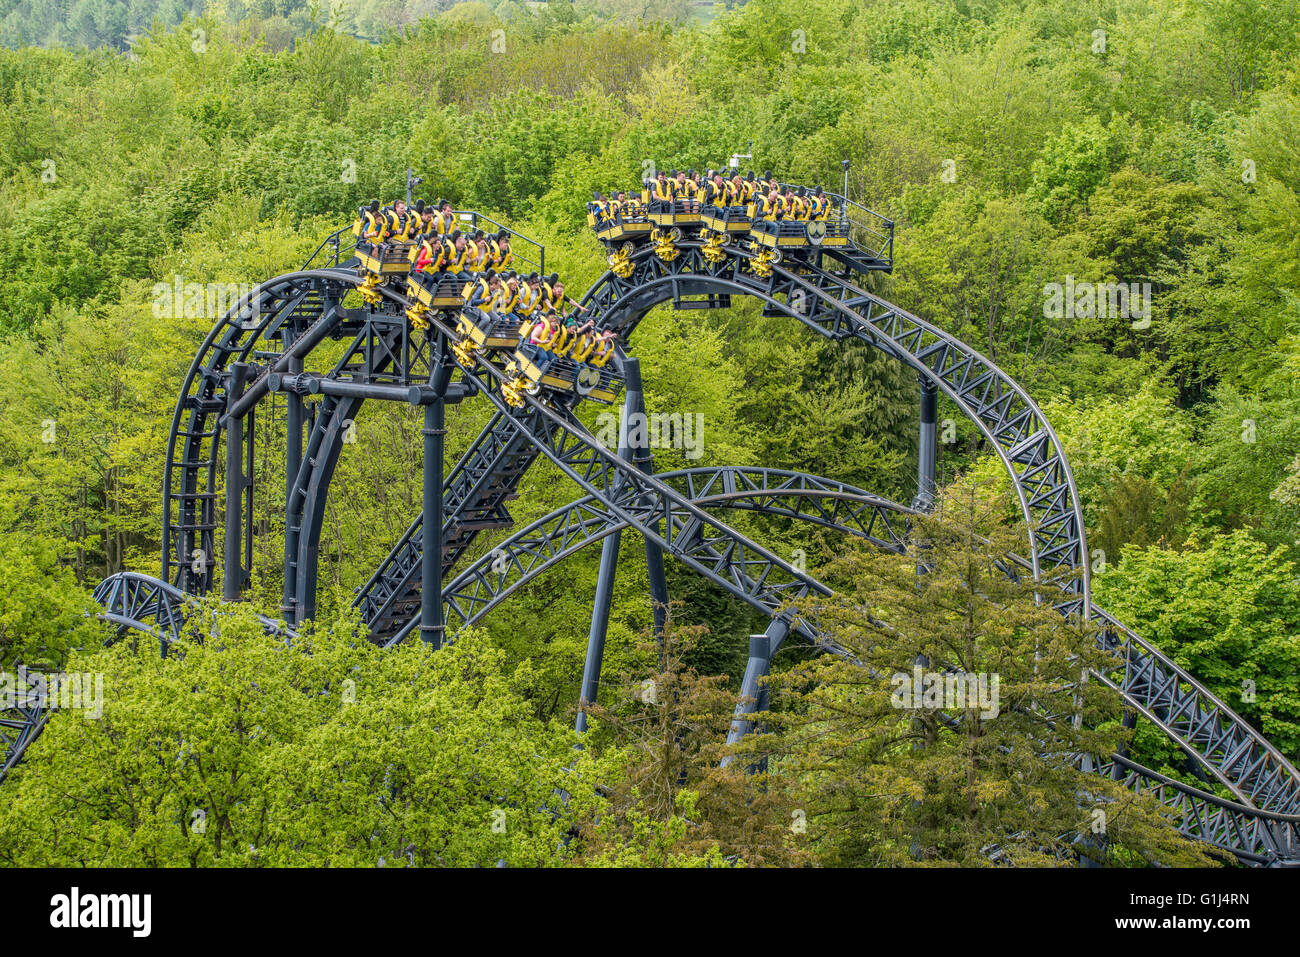 The Smiler Rollercoaster , 2 Trains Pass Each Other , Alton Towers Theme Park Staffordshire England Roller Coaster. Stock Photo